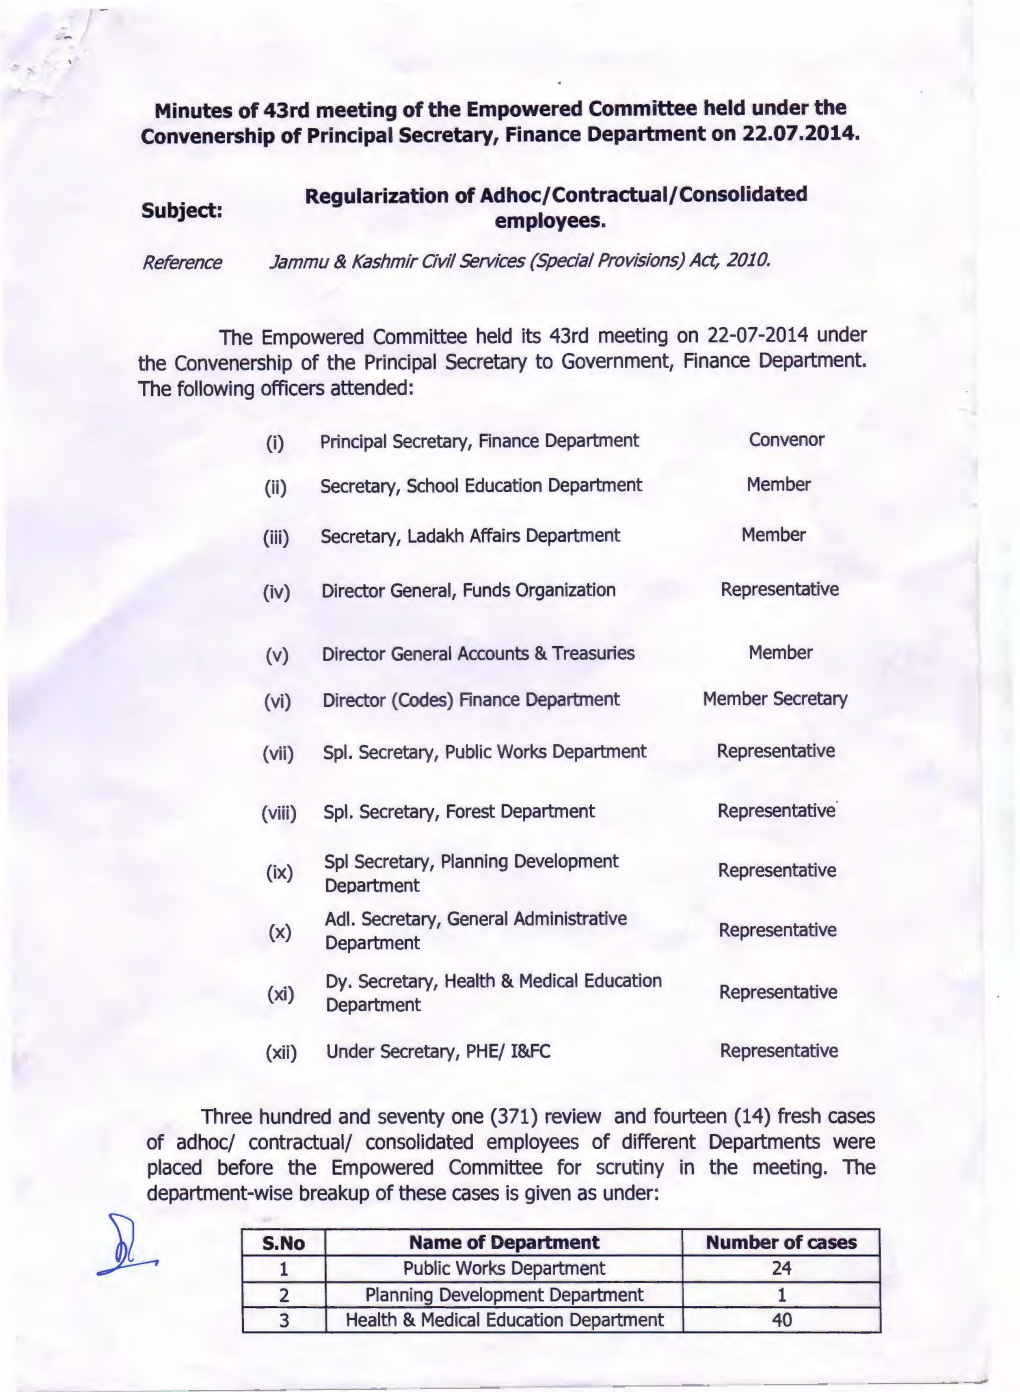 Minutes of 43Rd Meeting of the Empowered Committee Held Under the Convenership of Principal Secretary, Finance Department on 22.07.2014